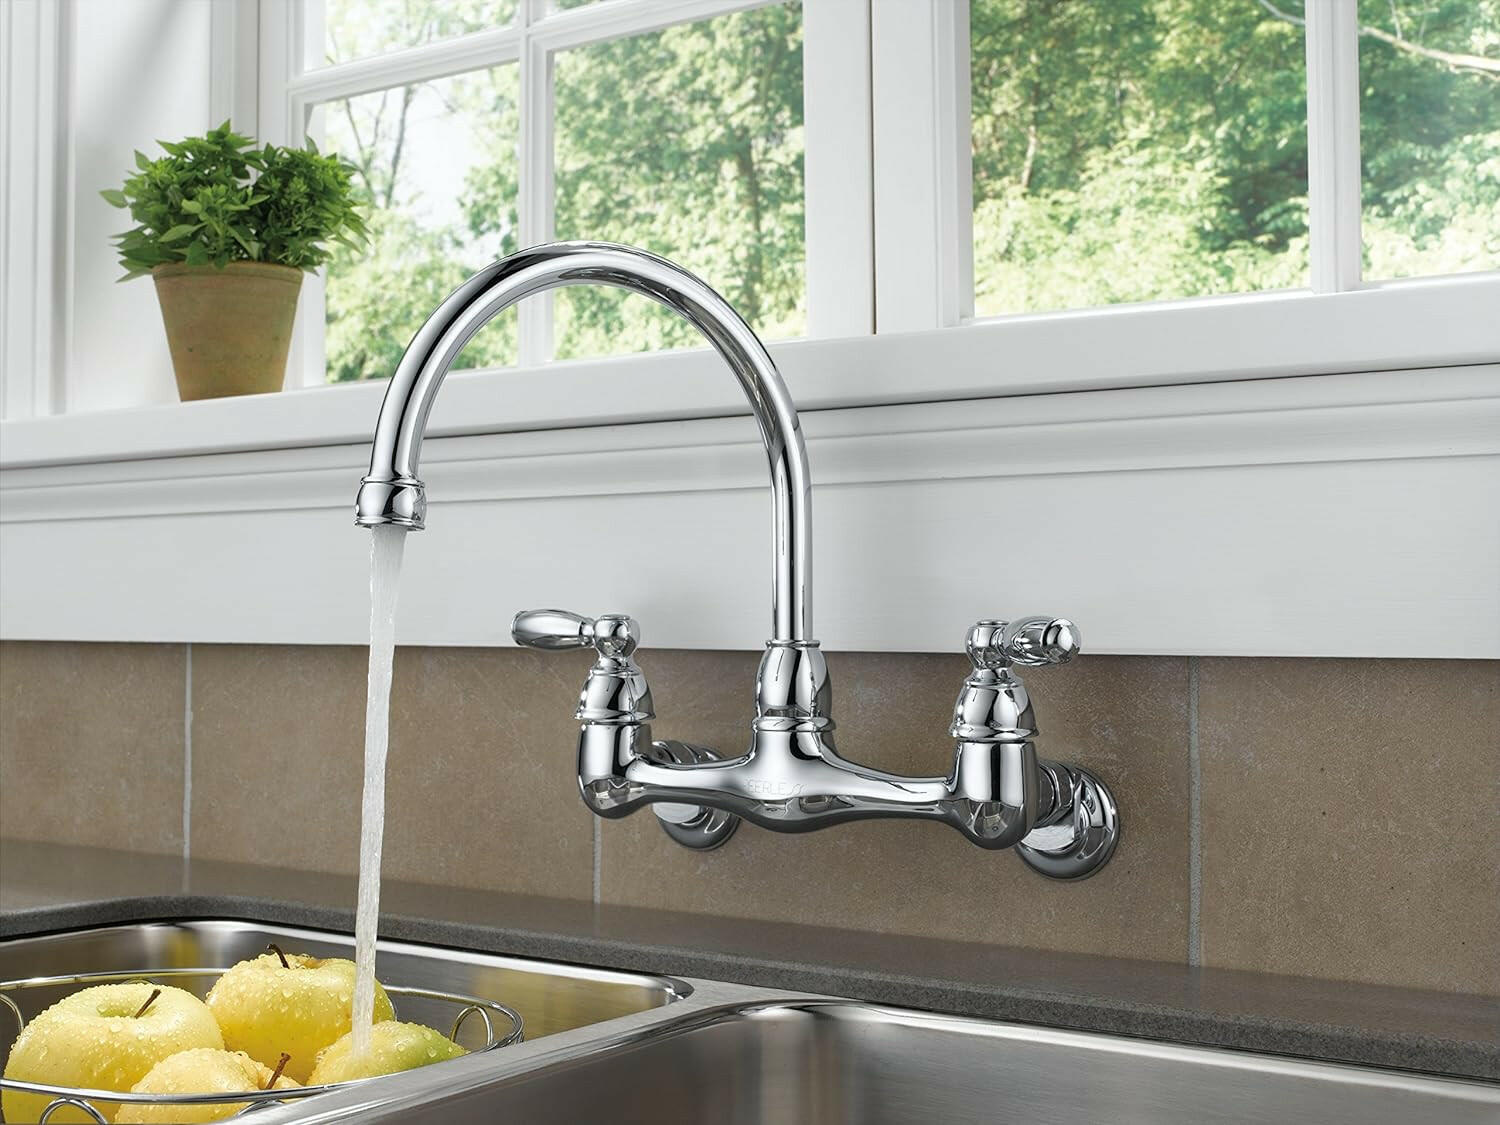 Peerless Claymore 2-Handle Wall-Mount Kitchen Sink Faucet, Chrome